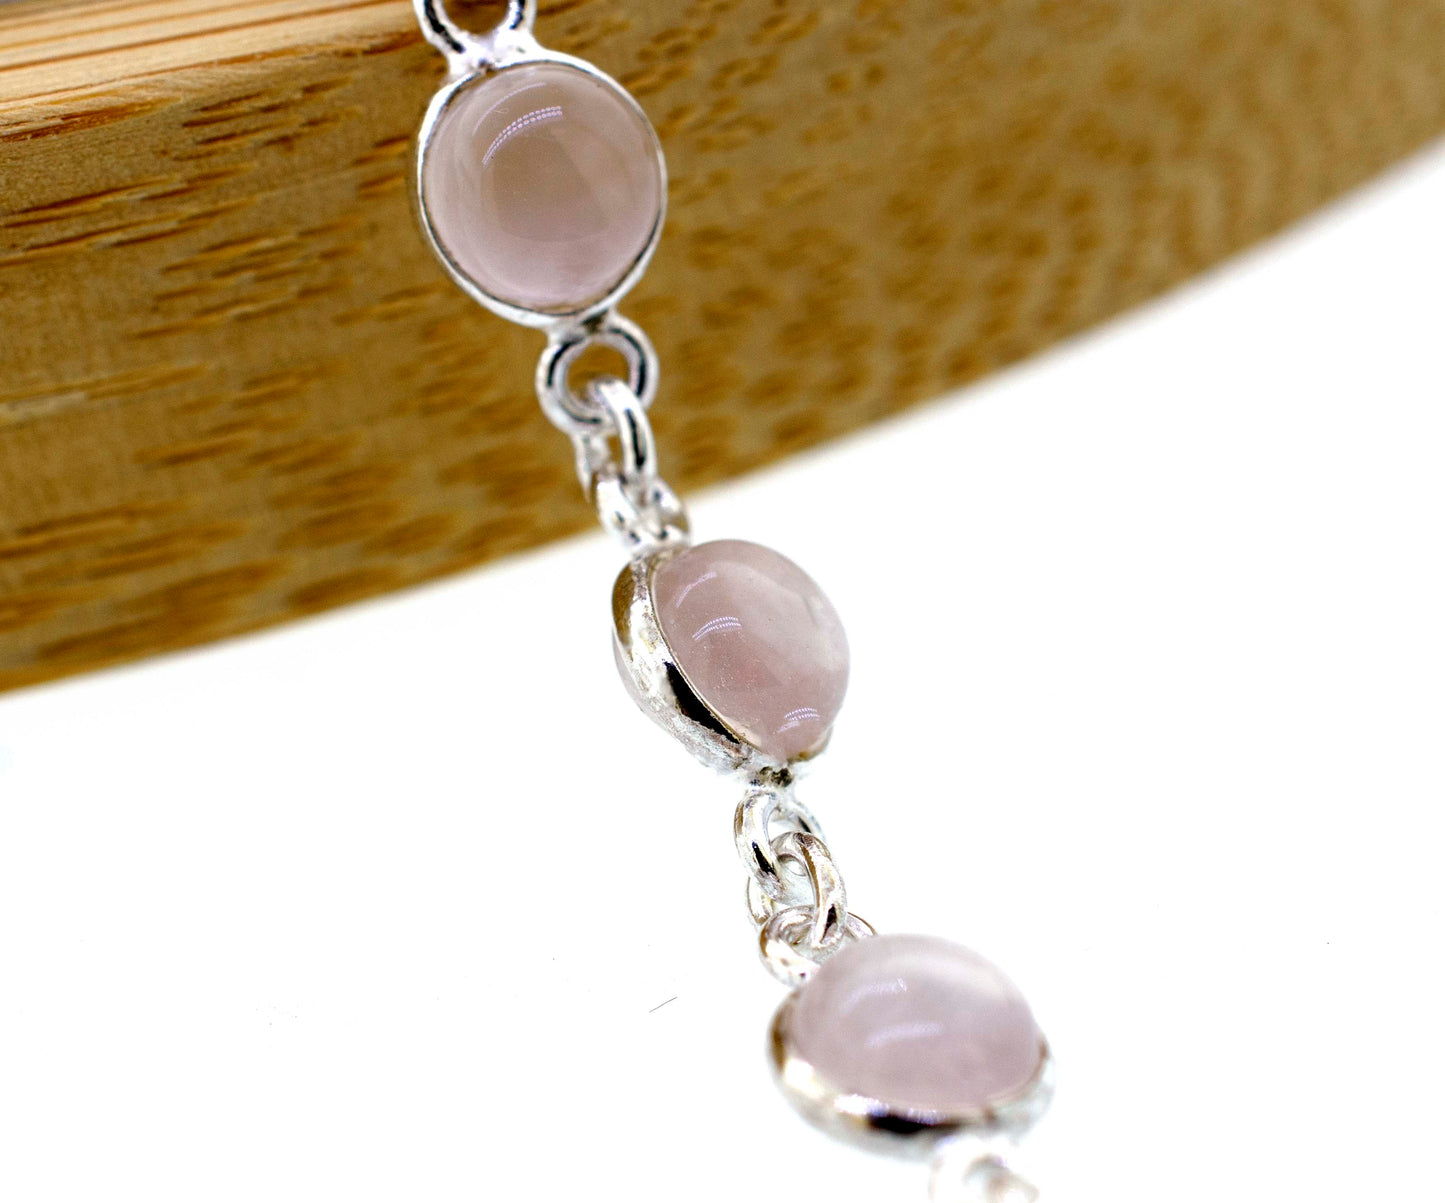 
                  
                    A Super Silver Simple Round Gemstone Bracelet With Delicate Wire Setting, with a round pink stone, placed elegantly on a wooden table.
                  
                